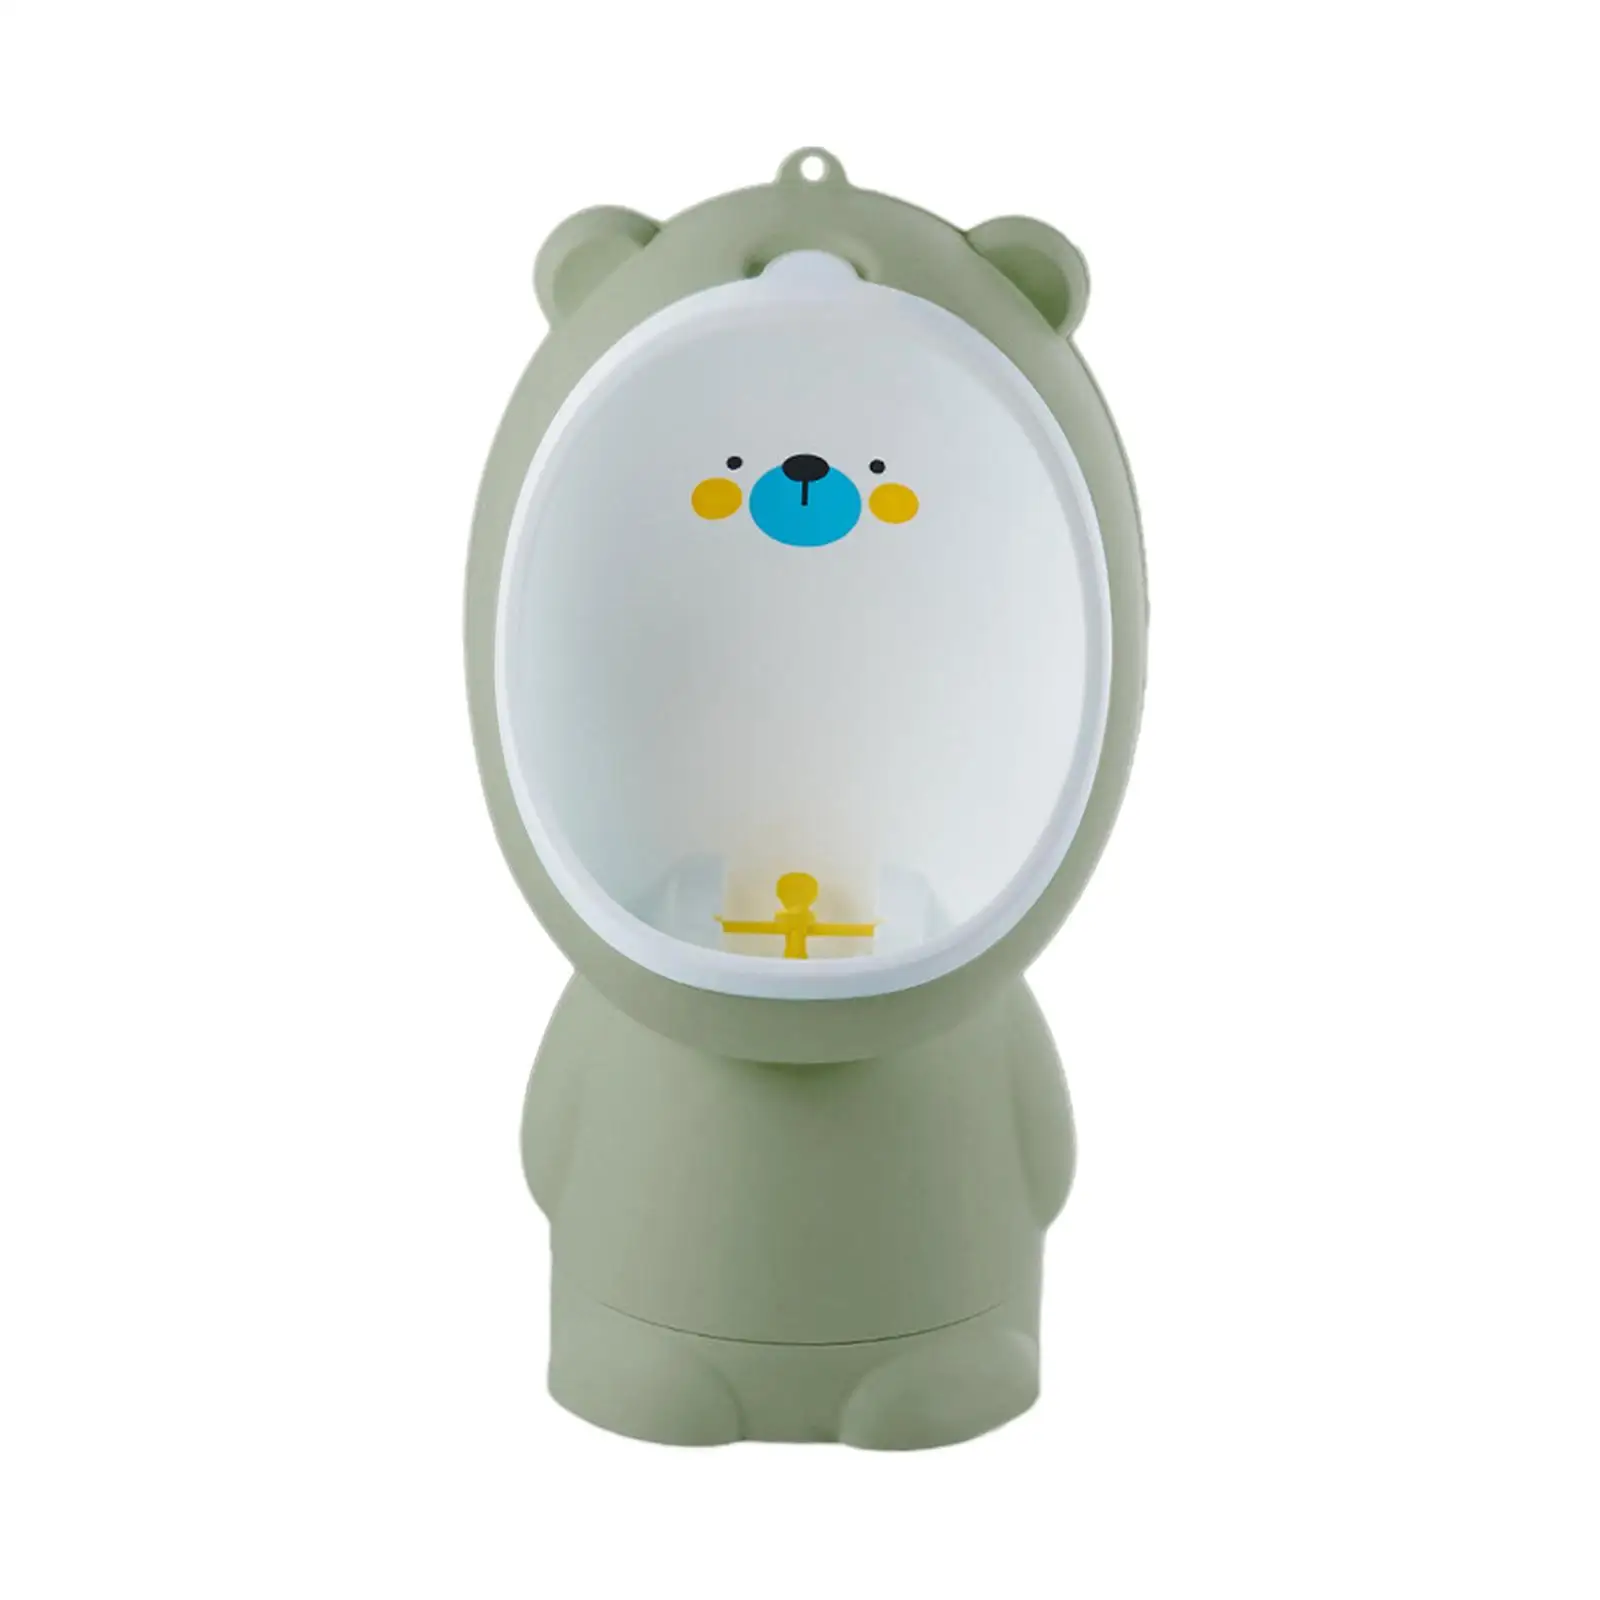 Urinals Toilet Training Standing Potty Cute Bear Potty Trainer Urinal Urinal Pee Trainer for Baby Kids Toddlers Boys Child